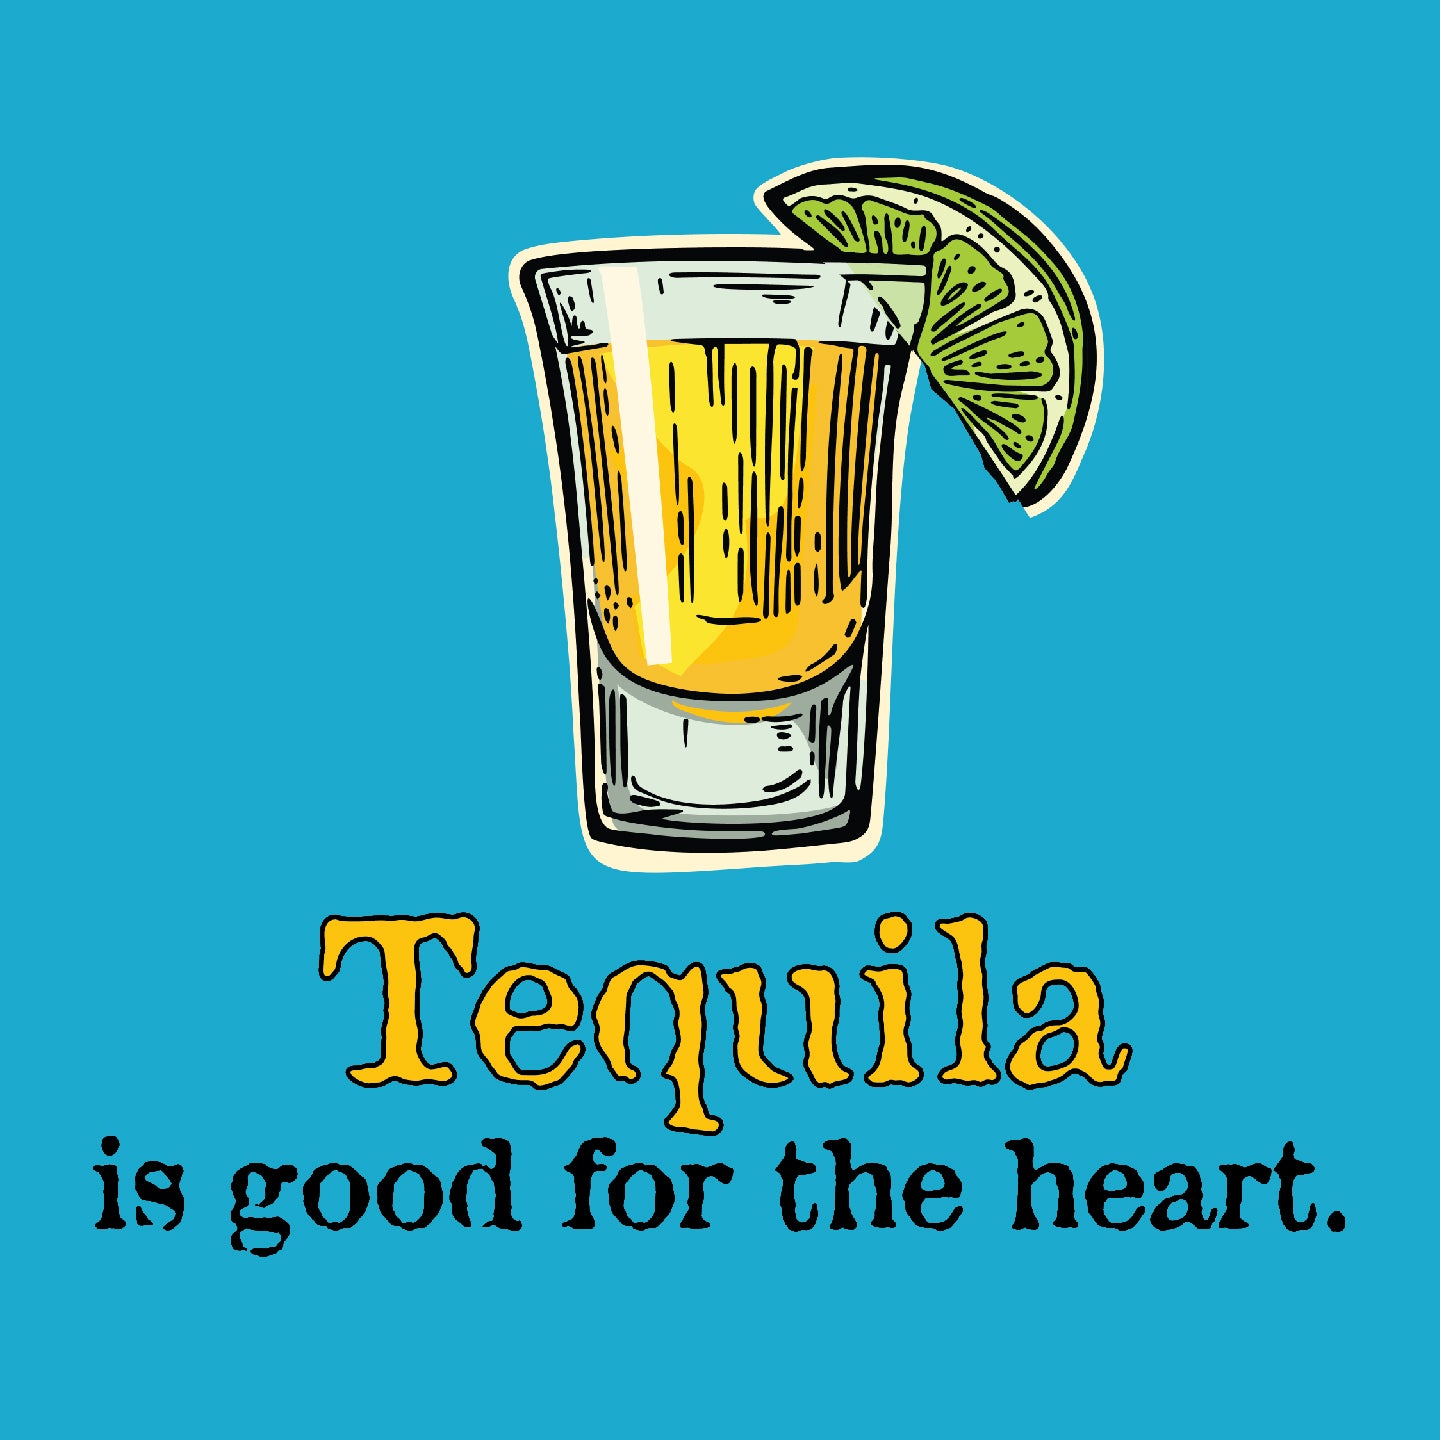 Tequila is good for the heart